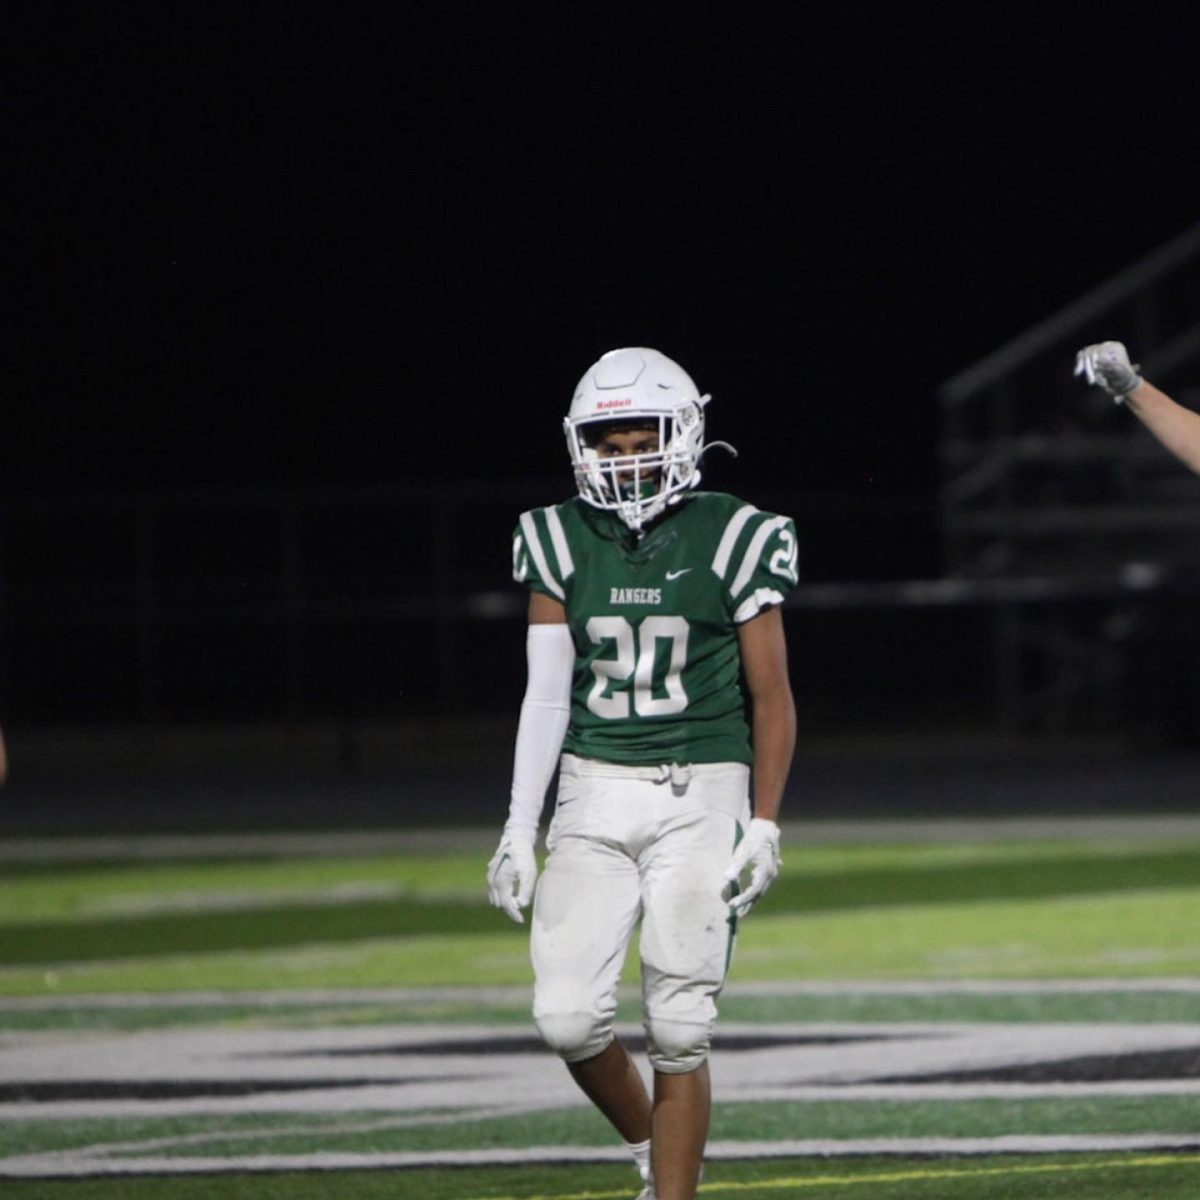 Q and A with JV football player, sophomore Naveen Ram